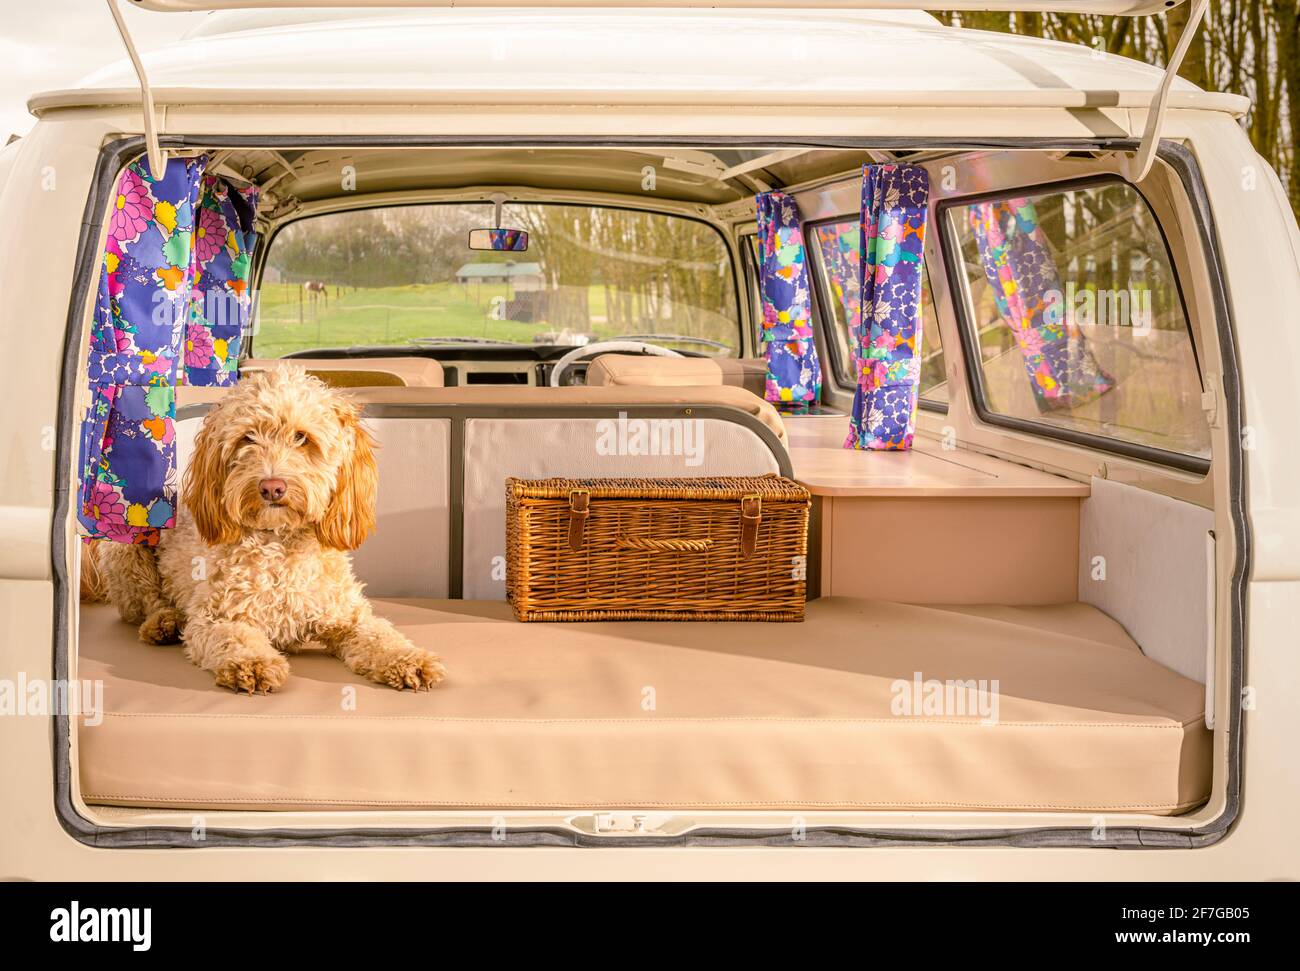 Cockapoo dog sitting in open back of VW campervan Stock Photo